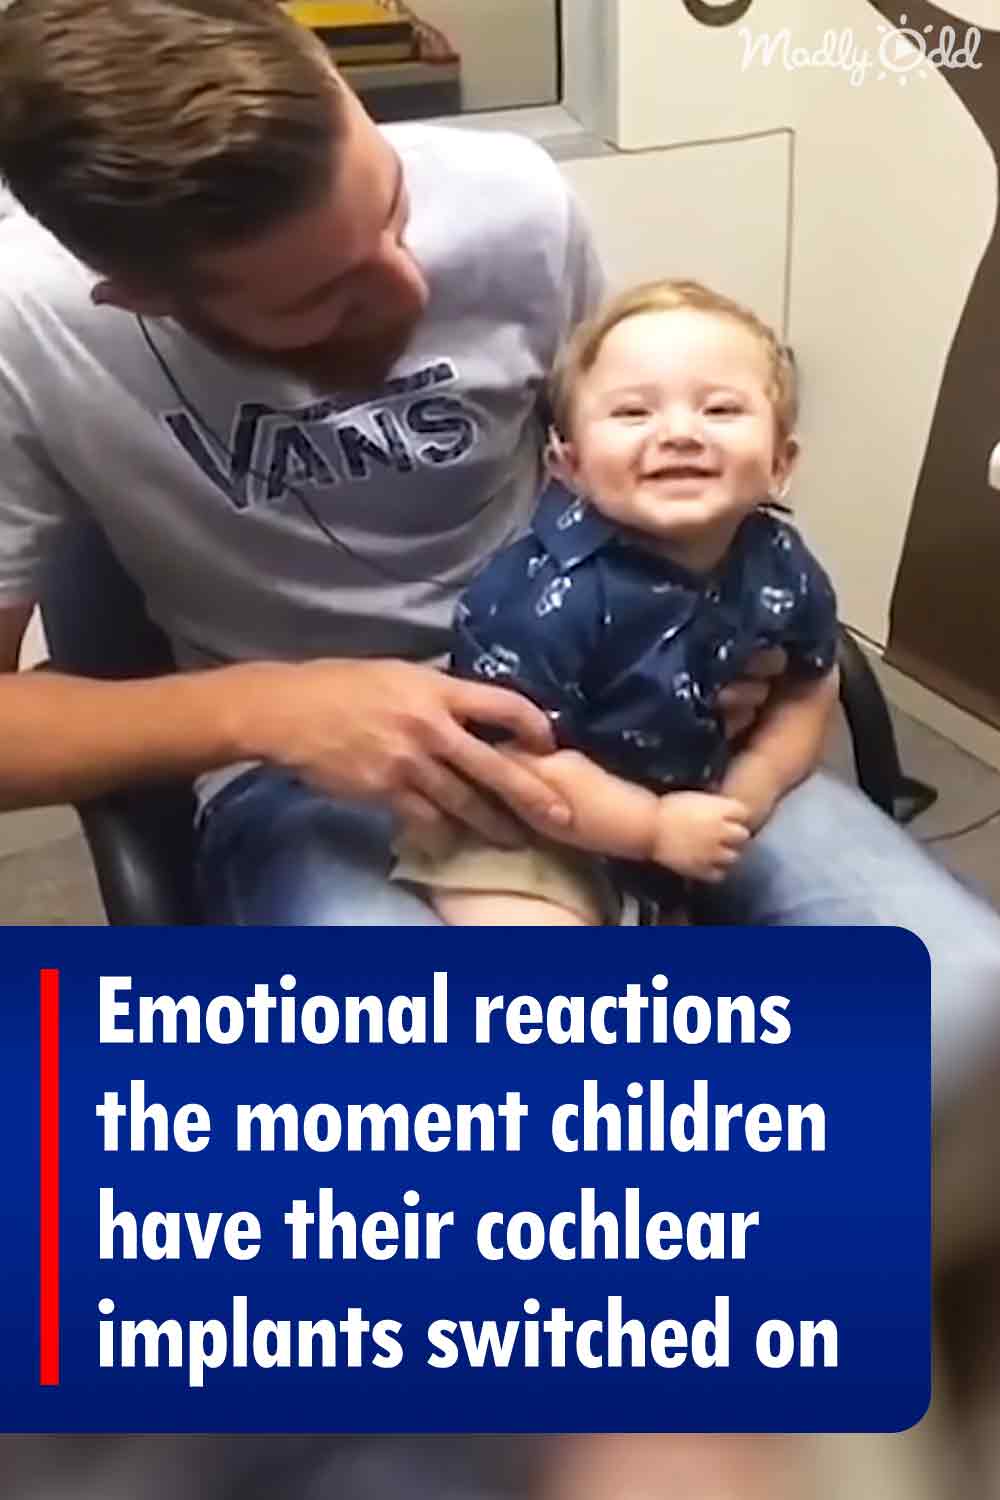 Emotional reactions the moment children have their cochlear implants switched on